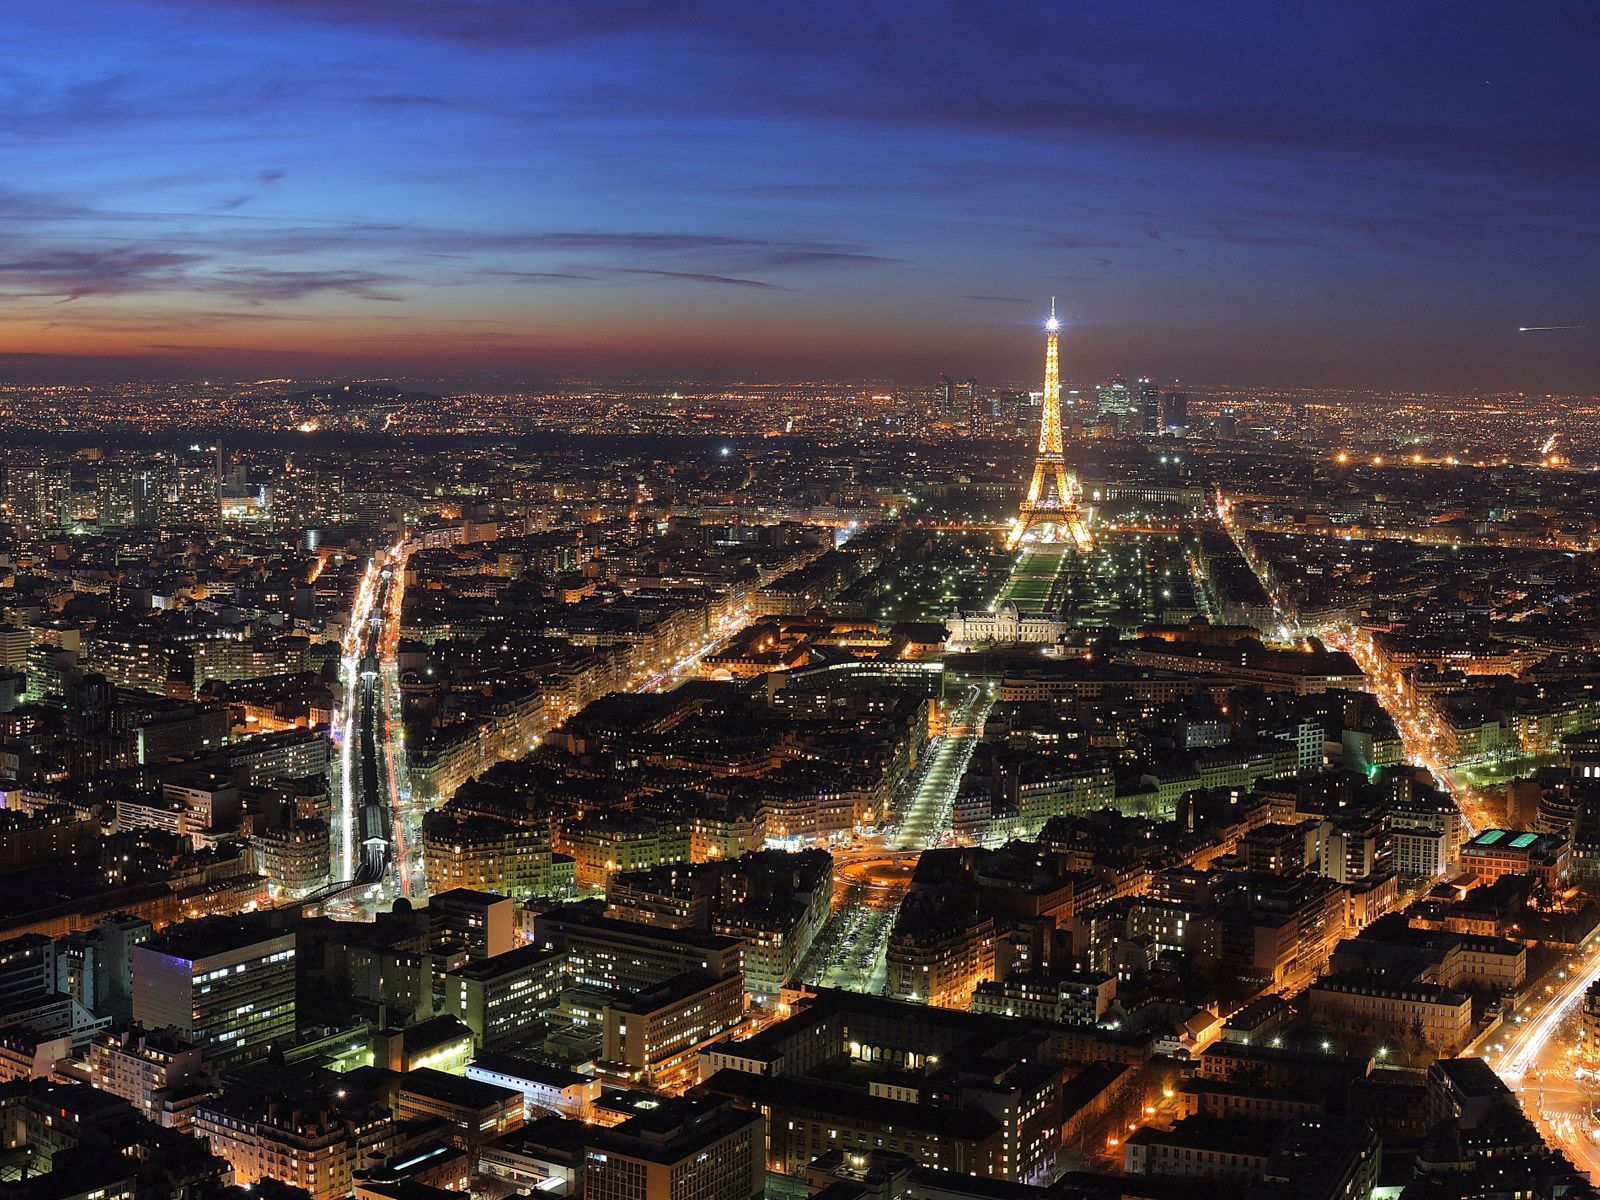 eiffel tower, paris, cities, night, view from above, city lights, france